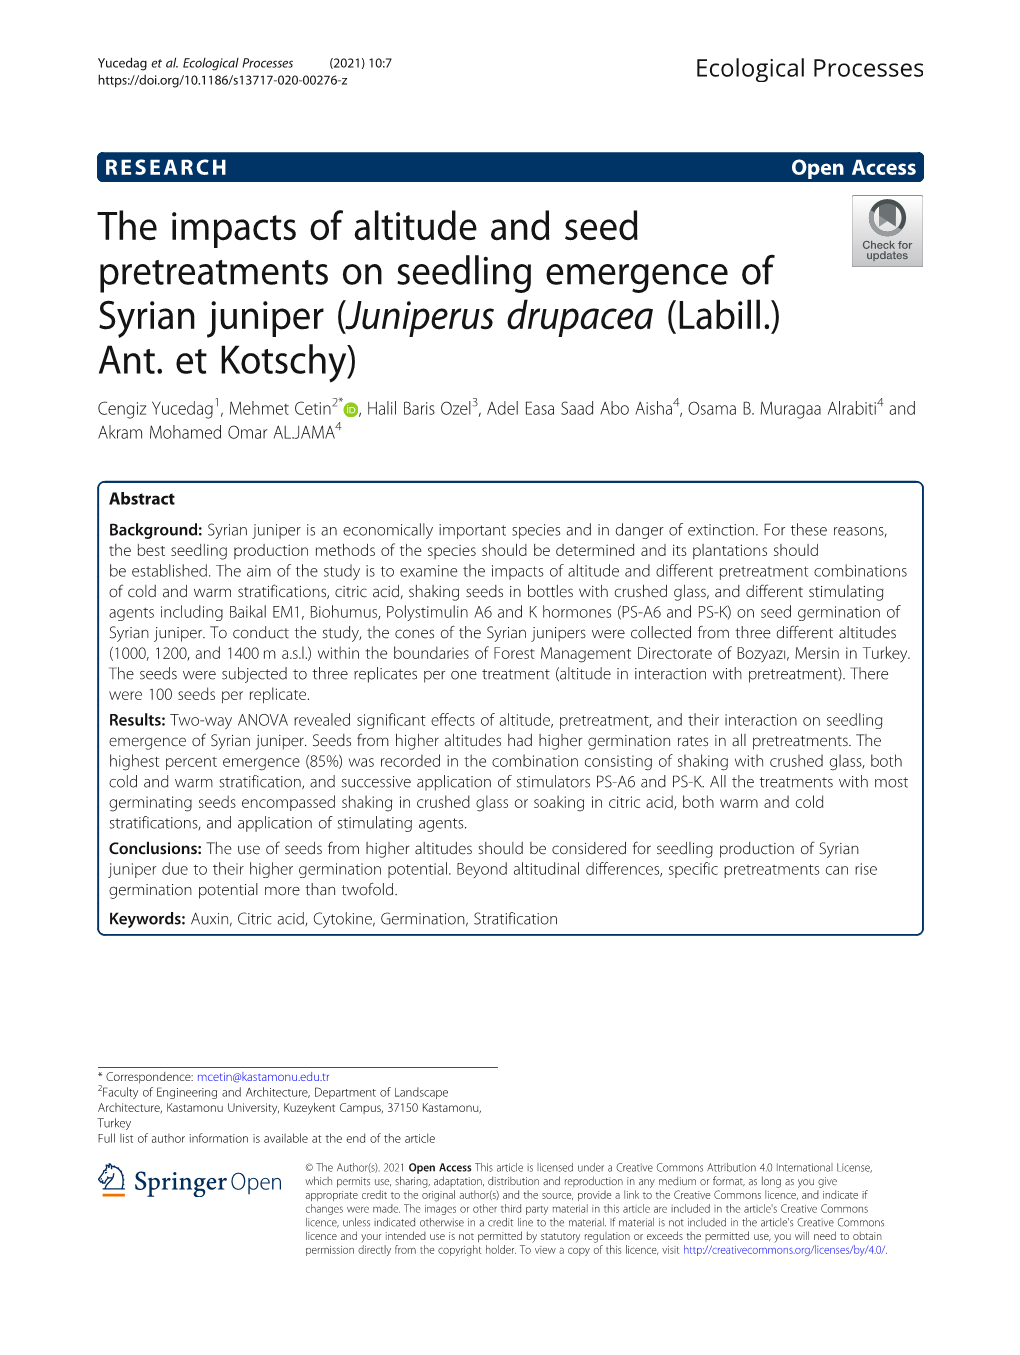 The Impacts of Altitude and Seed Pretreatments on Seedling Emergence of Syrian Juniper (Juniperus Drupacea (Labill.) Ant